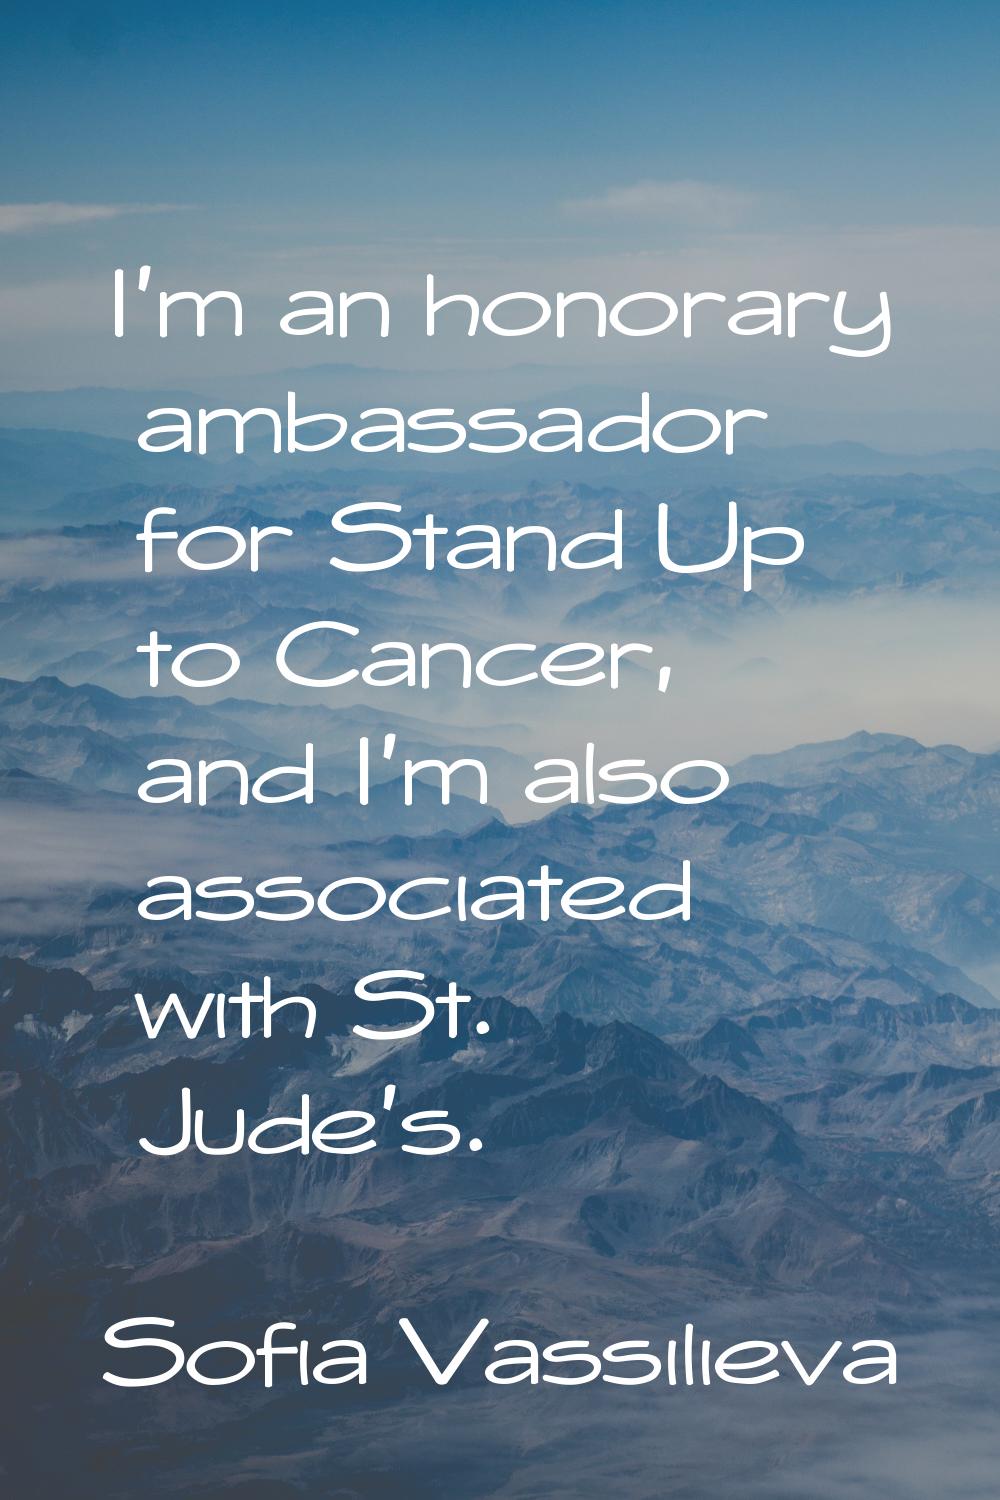 I'm an honorary ambassador for Stand Up to Cancer, and I'm also associated with St. Jude's.